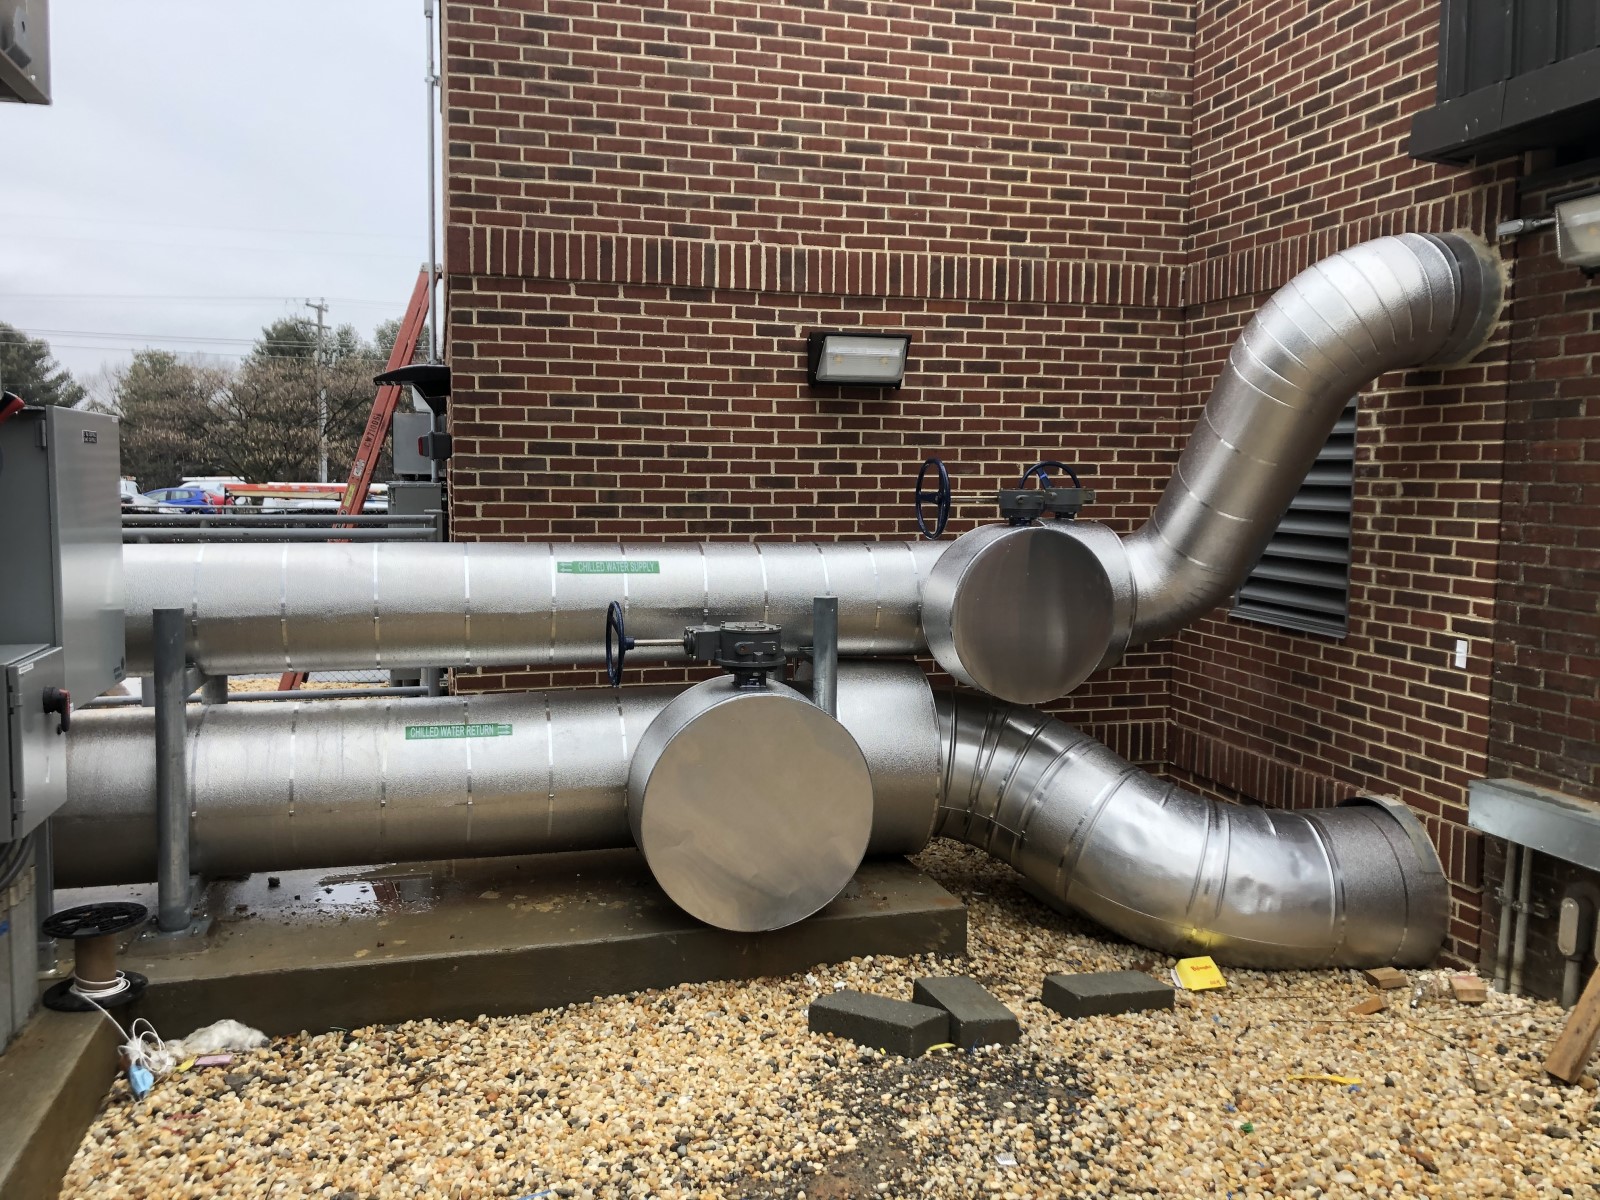 Industrial pipes leading away from a building and into HVAC machinery.